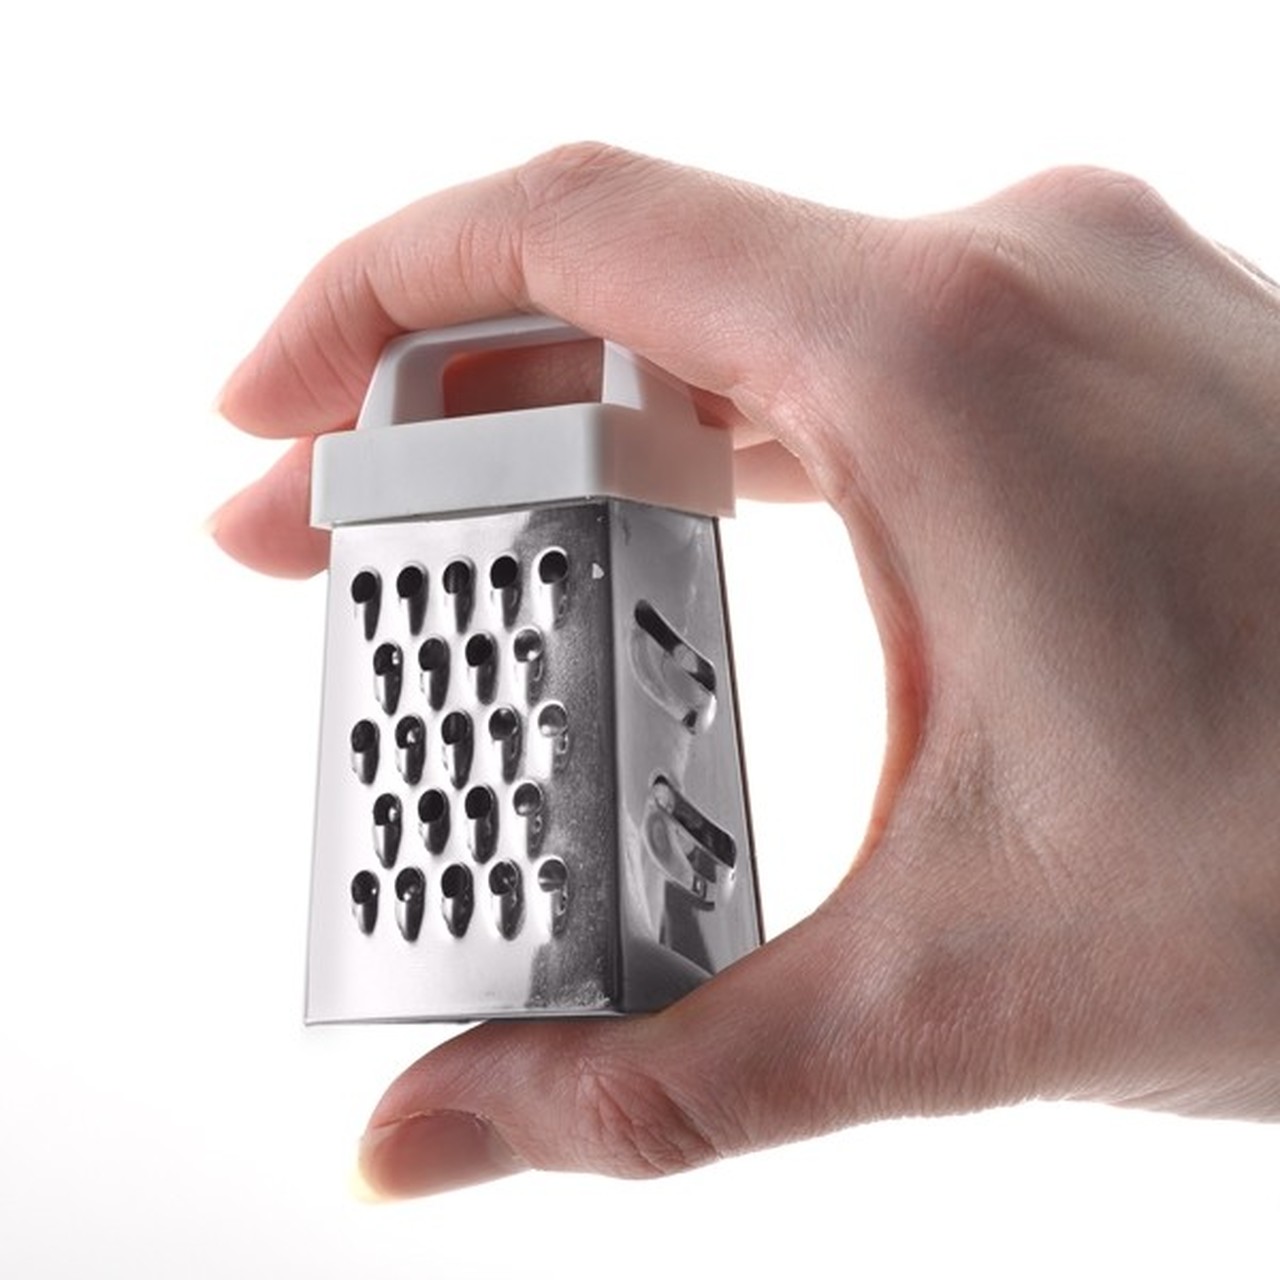 2.5 Length Four Sided Grater Kitchen Craft 2.5 Height Riforla ⭐⭐⭐⭐⭐ Perfect Mini Grater- Stainless Steel Mini Grater 2 Width